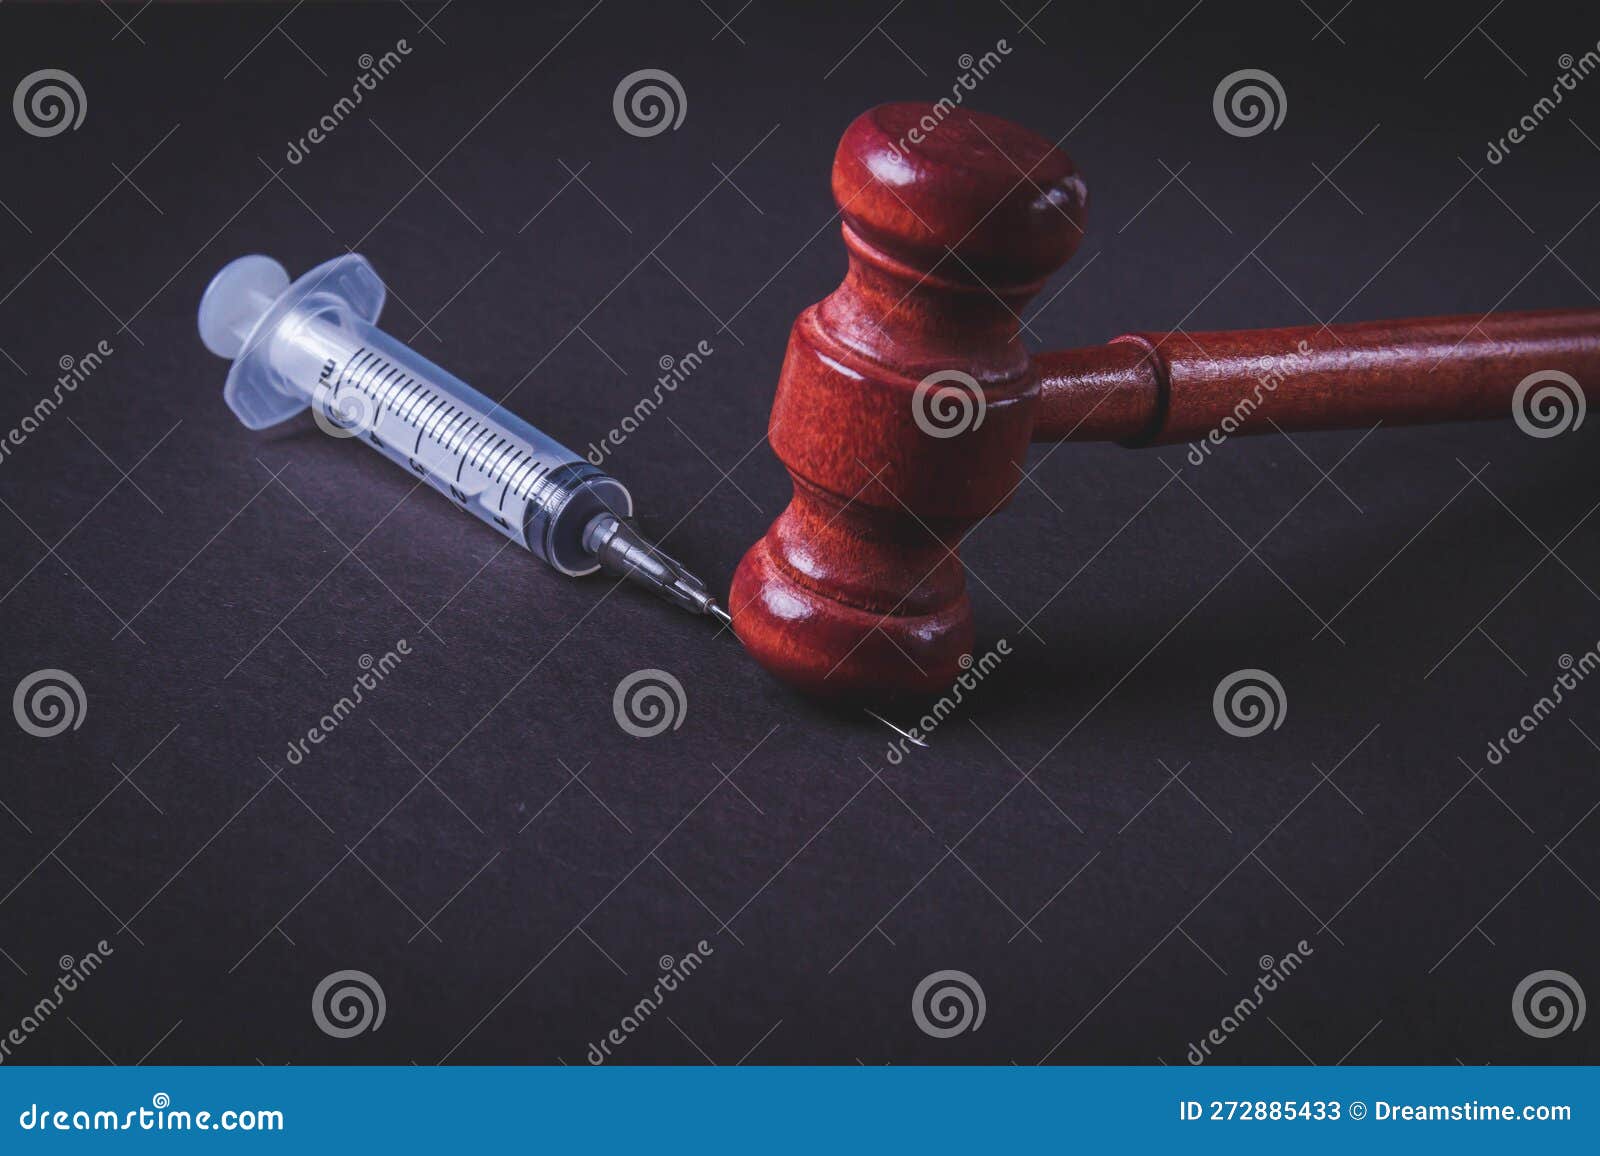 the trial of a medical worker. prohibited drugs. doping control over athletes. anabolics and vitamins.